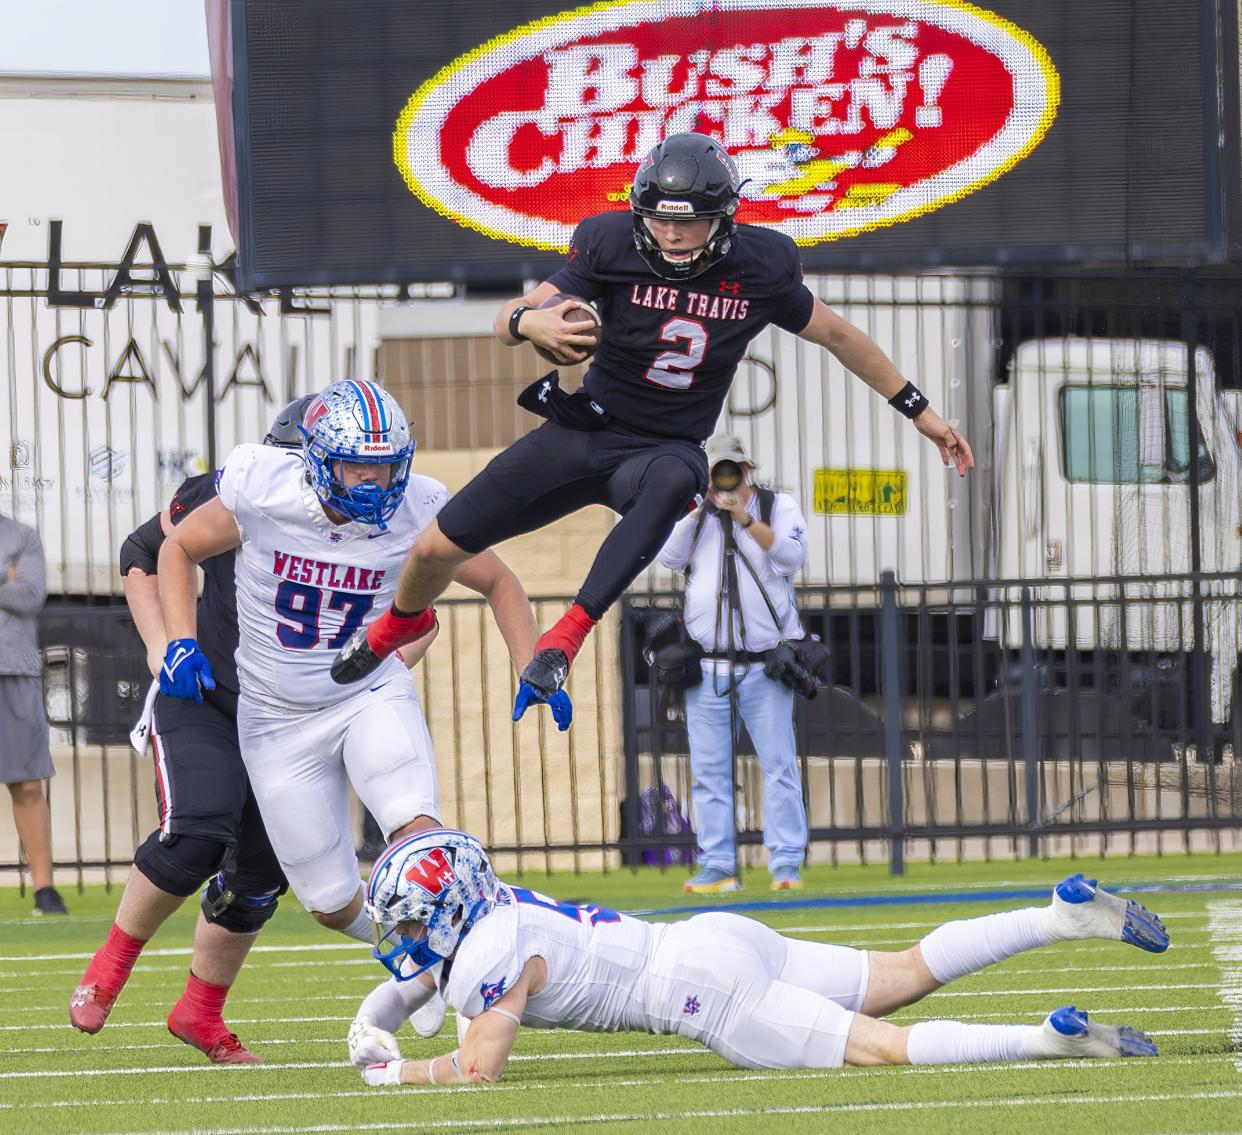 Lake Travis wide receiver Adrian Peradoza II hurdles Westlake free safety Payton Luther during their Class 6A Division I quarterfinal playoff game Saturday at the Pfield in Pflugerville. The Chaparrals won 21-14 to advance to the state semifinals.